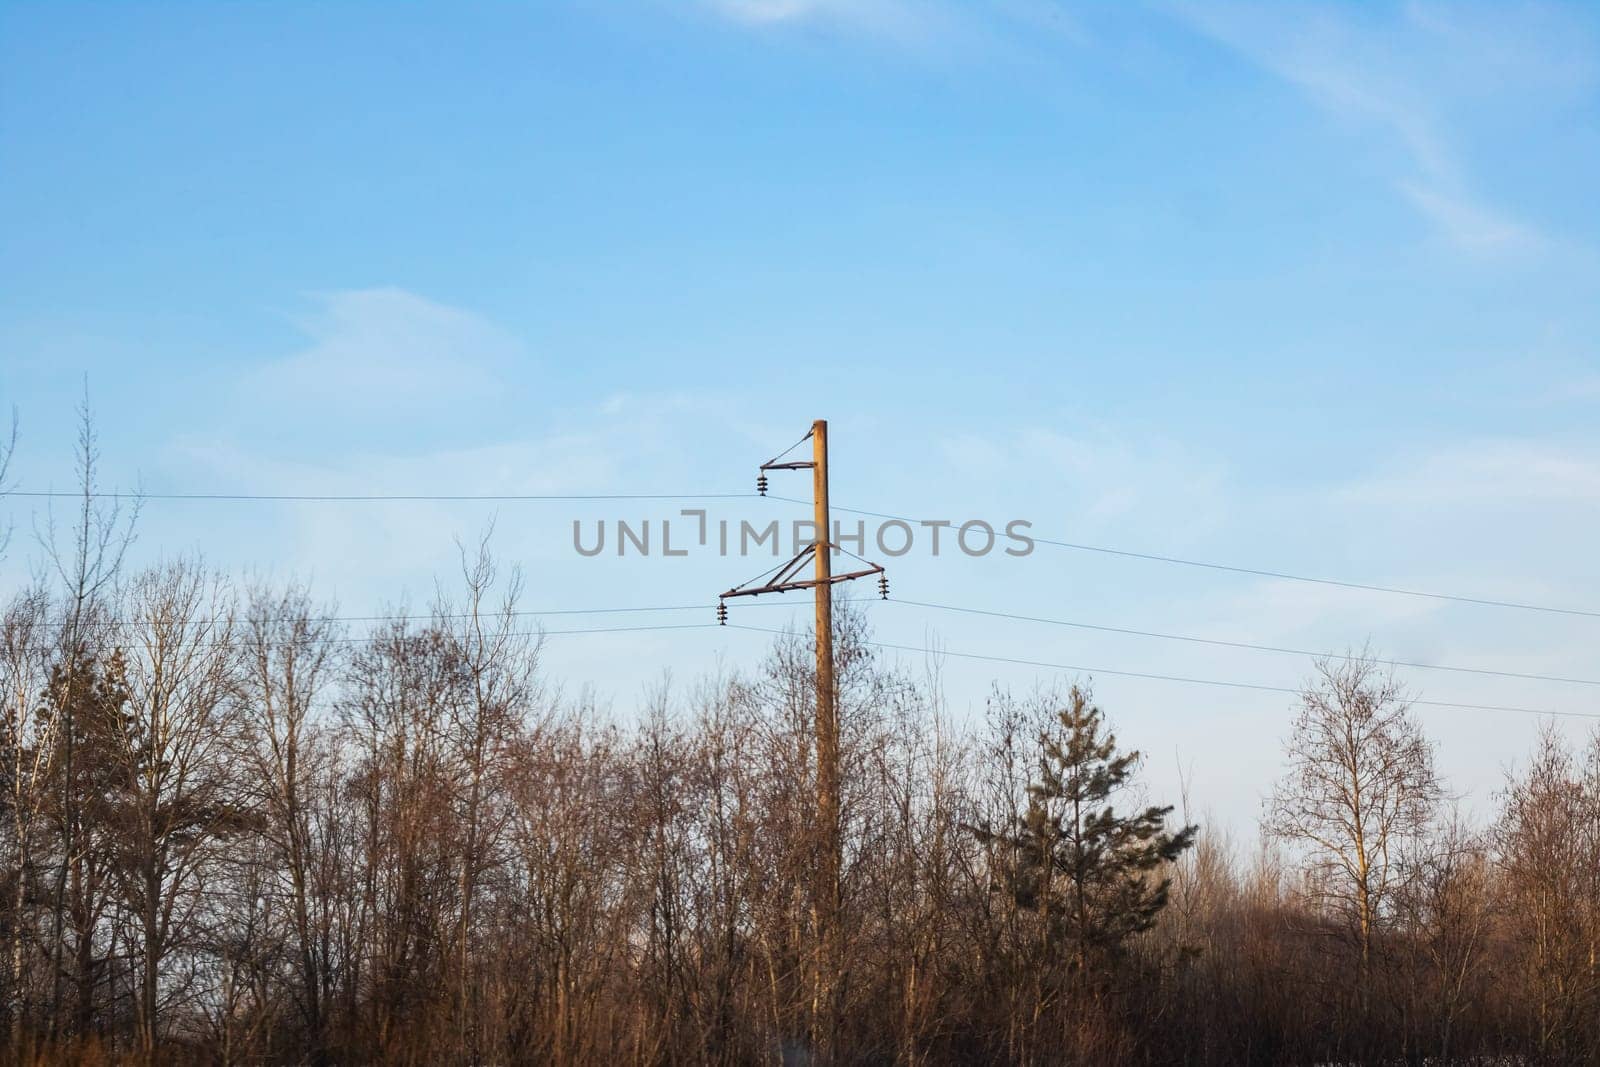 A pole with electric wires against a blue sky, copy space